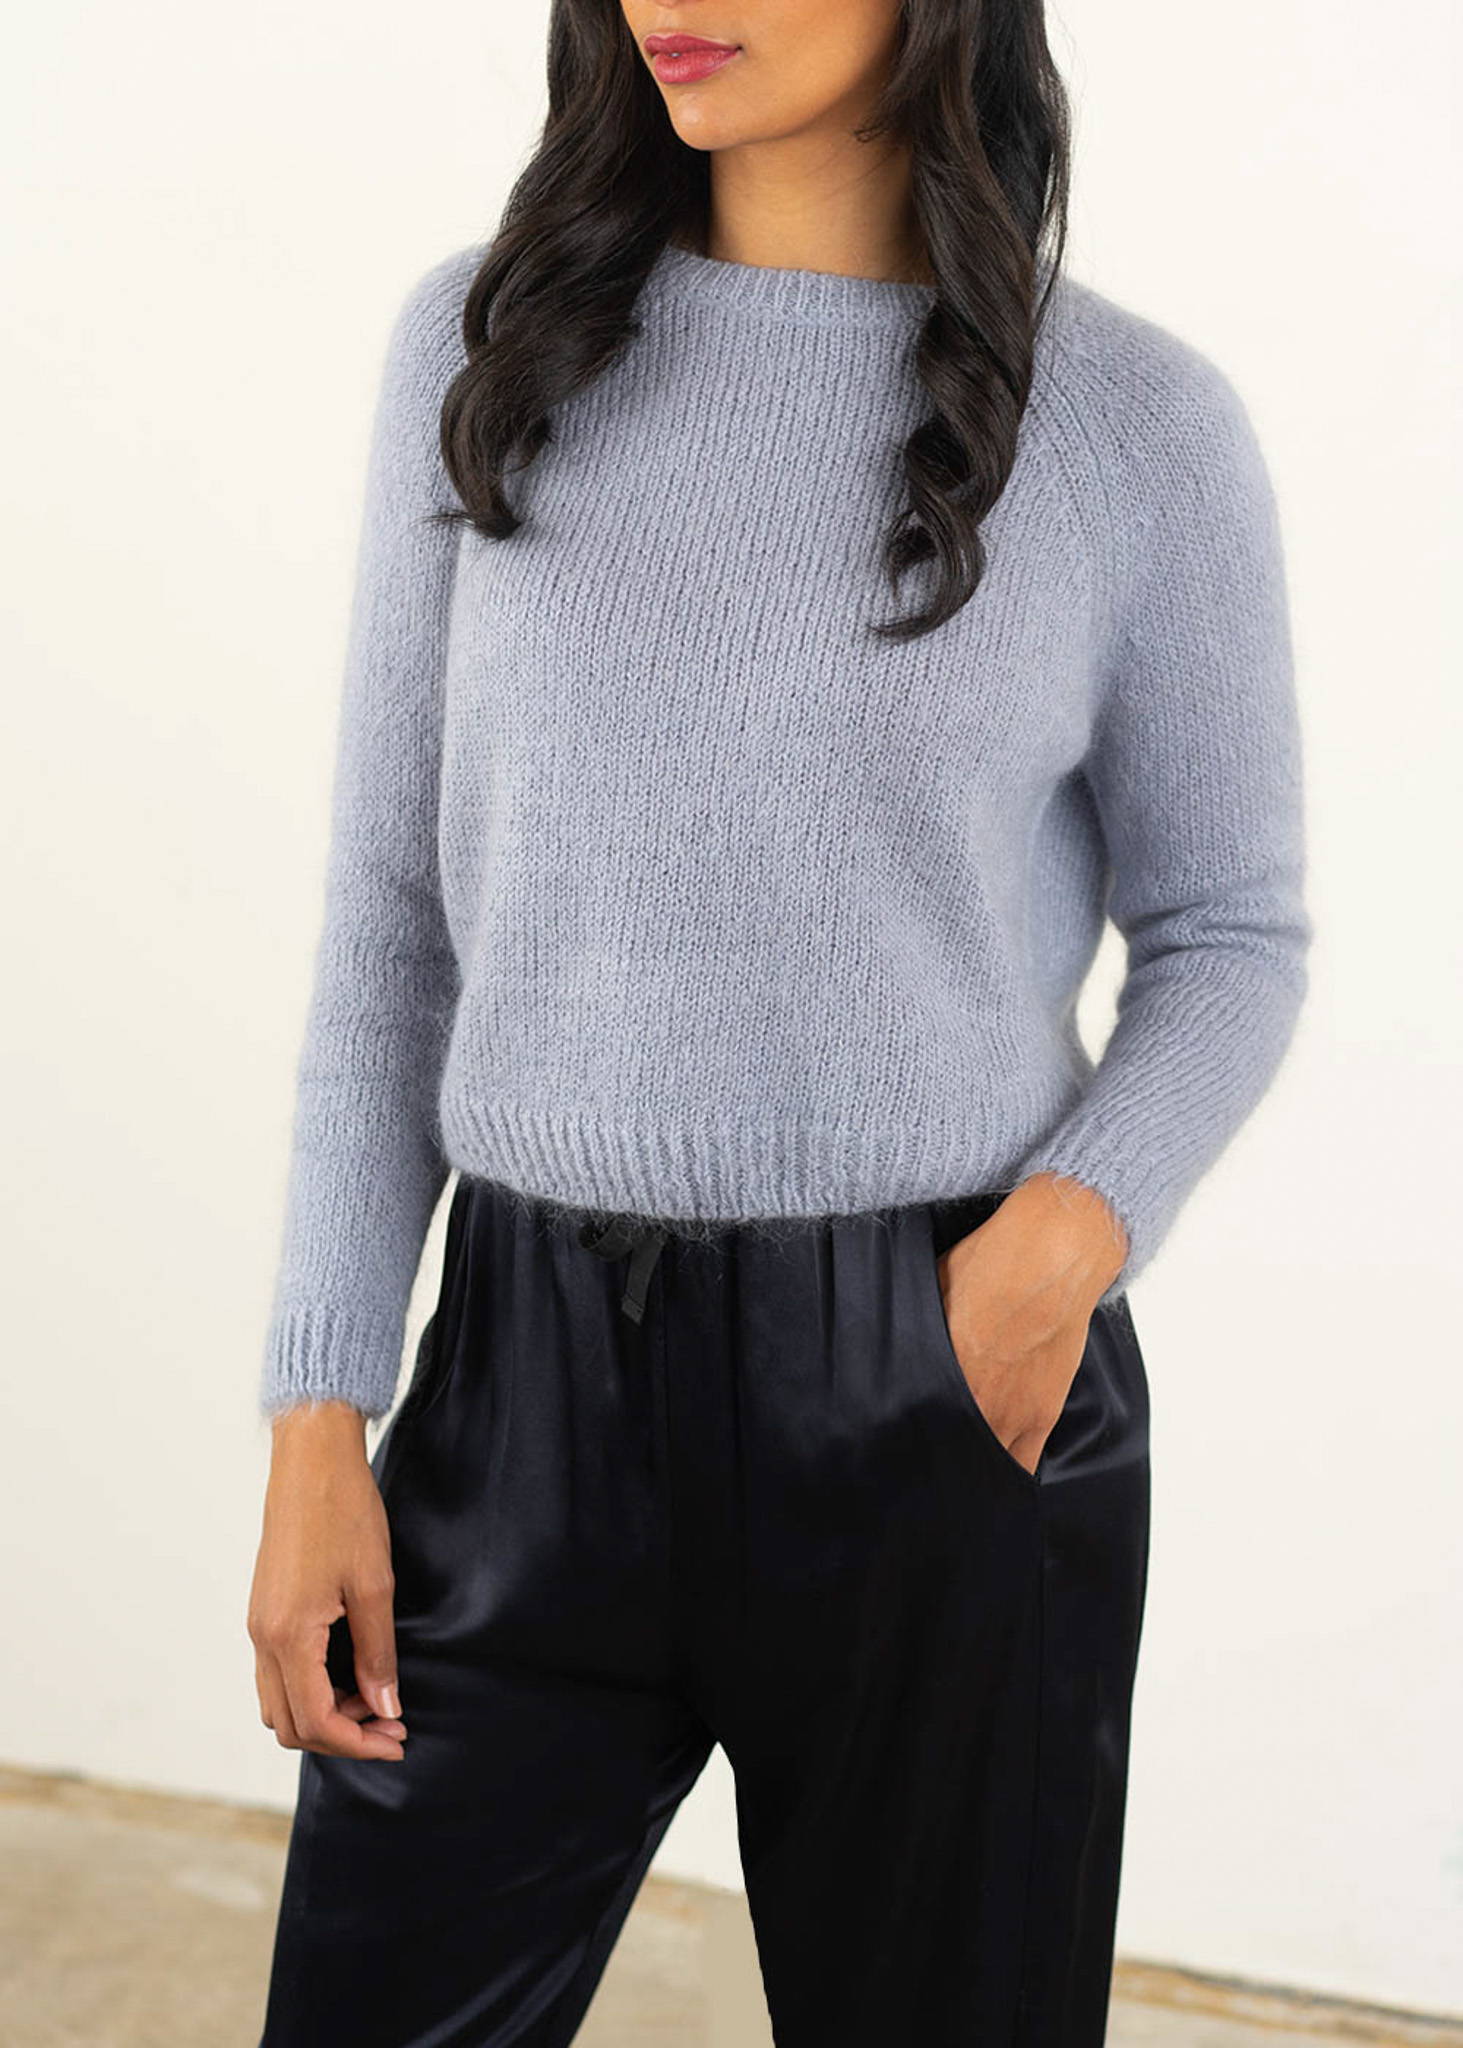 A model wearing a lilac knitted sweater over dark blue satin trousers